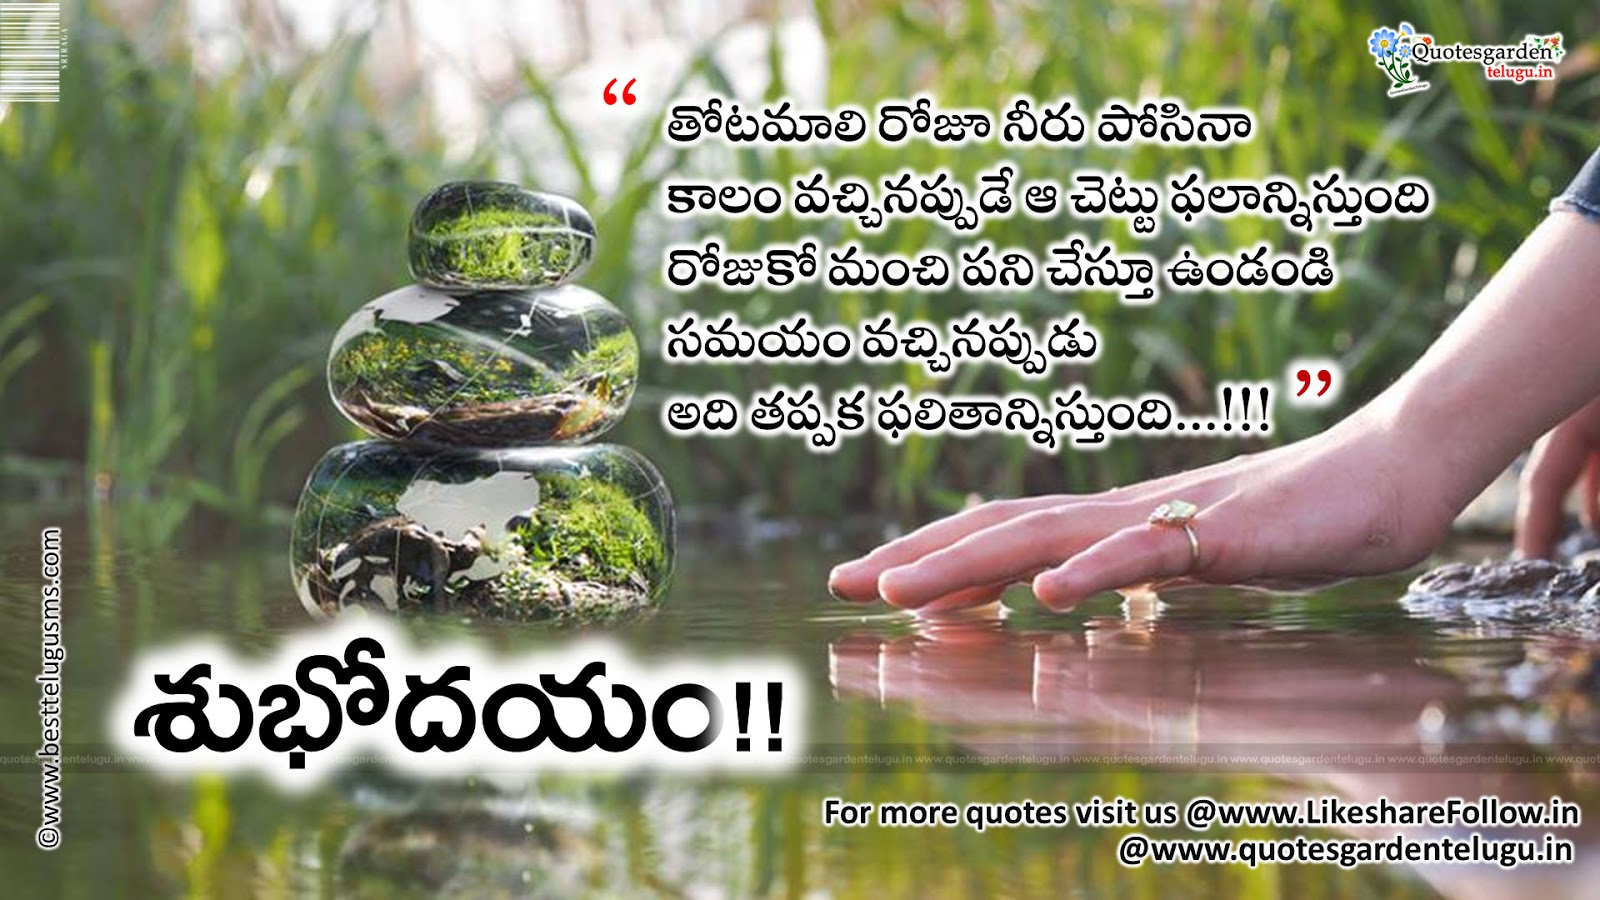 Good morning Inspirational Quotes in Telugu 384 | Like Share Follow